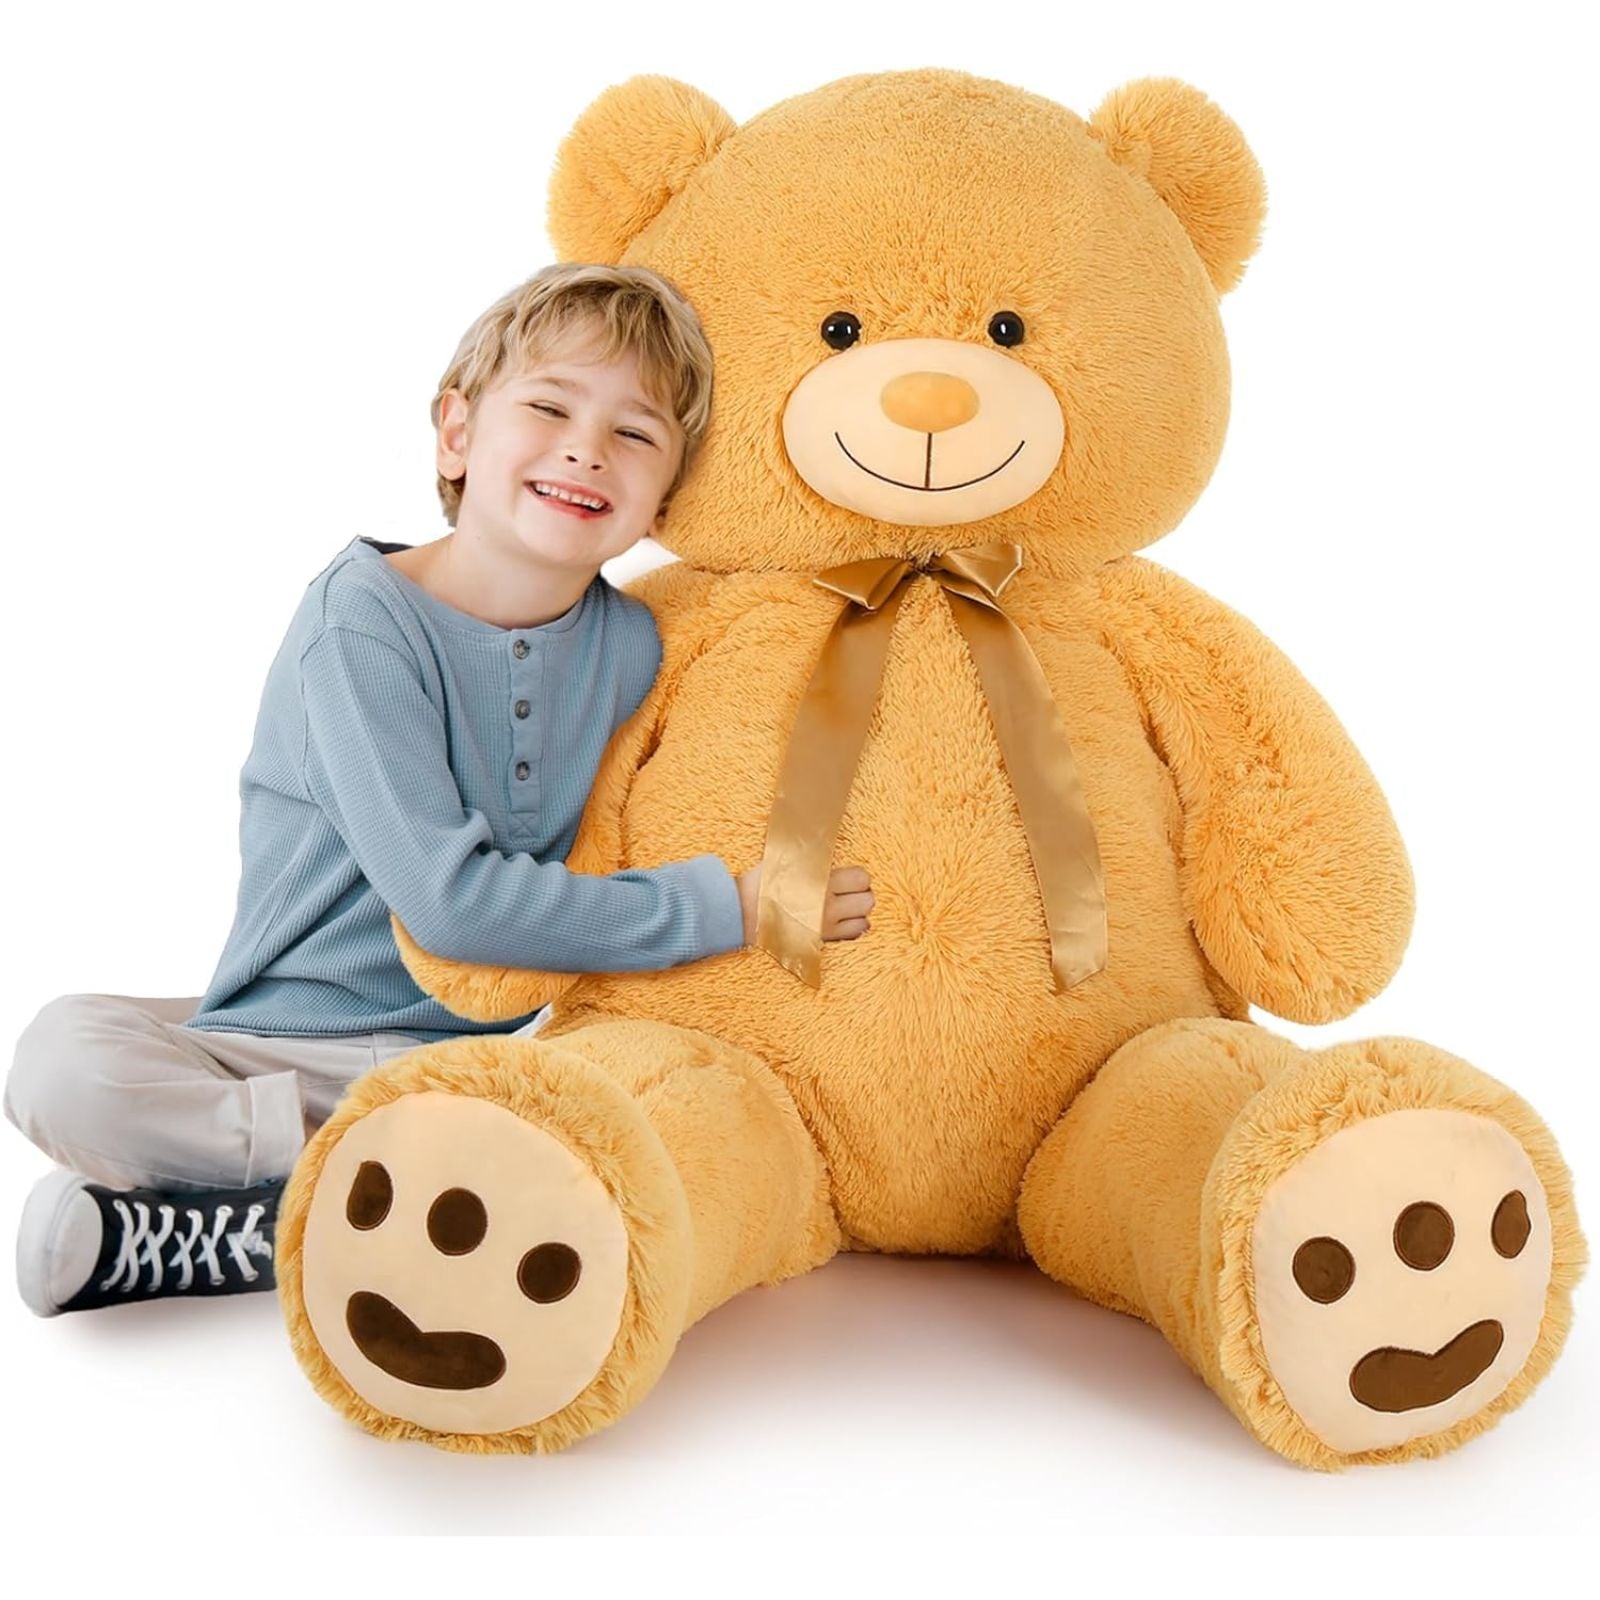 Large Teddy Bear Stuffed Toy, Light Brown/Pink, 5 FT